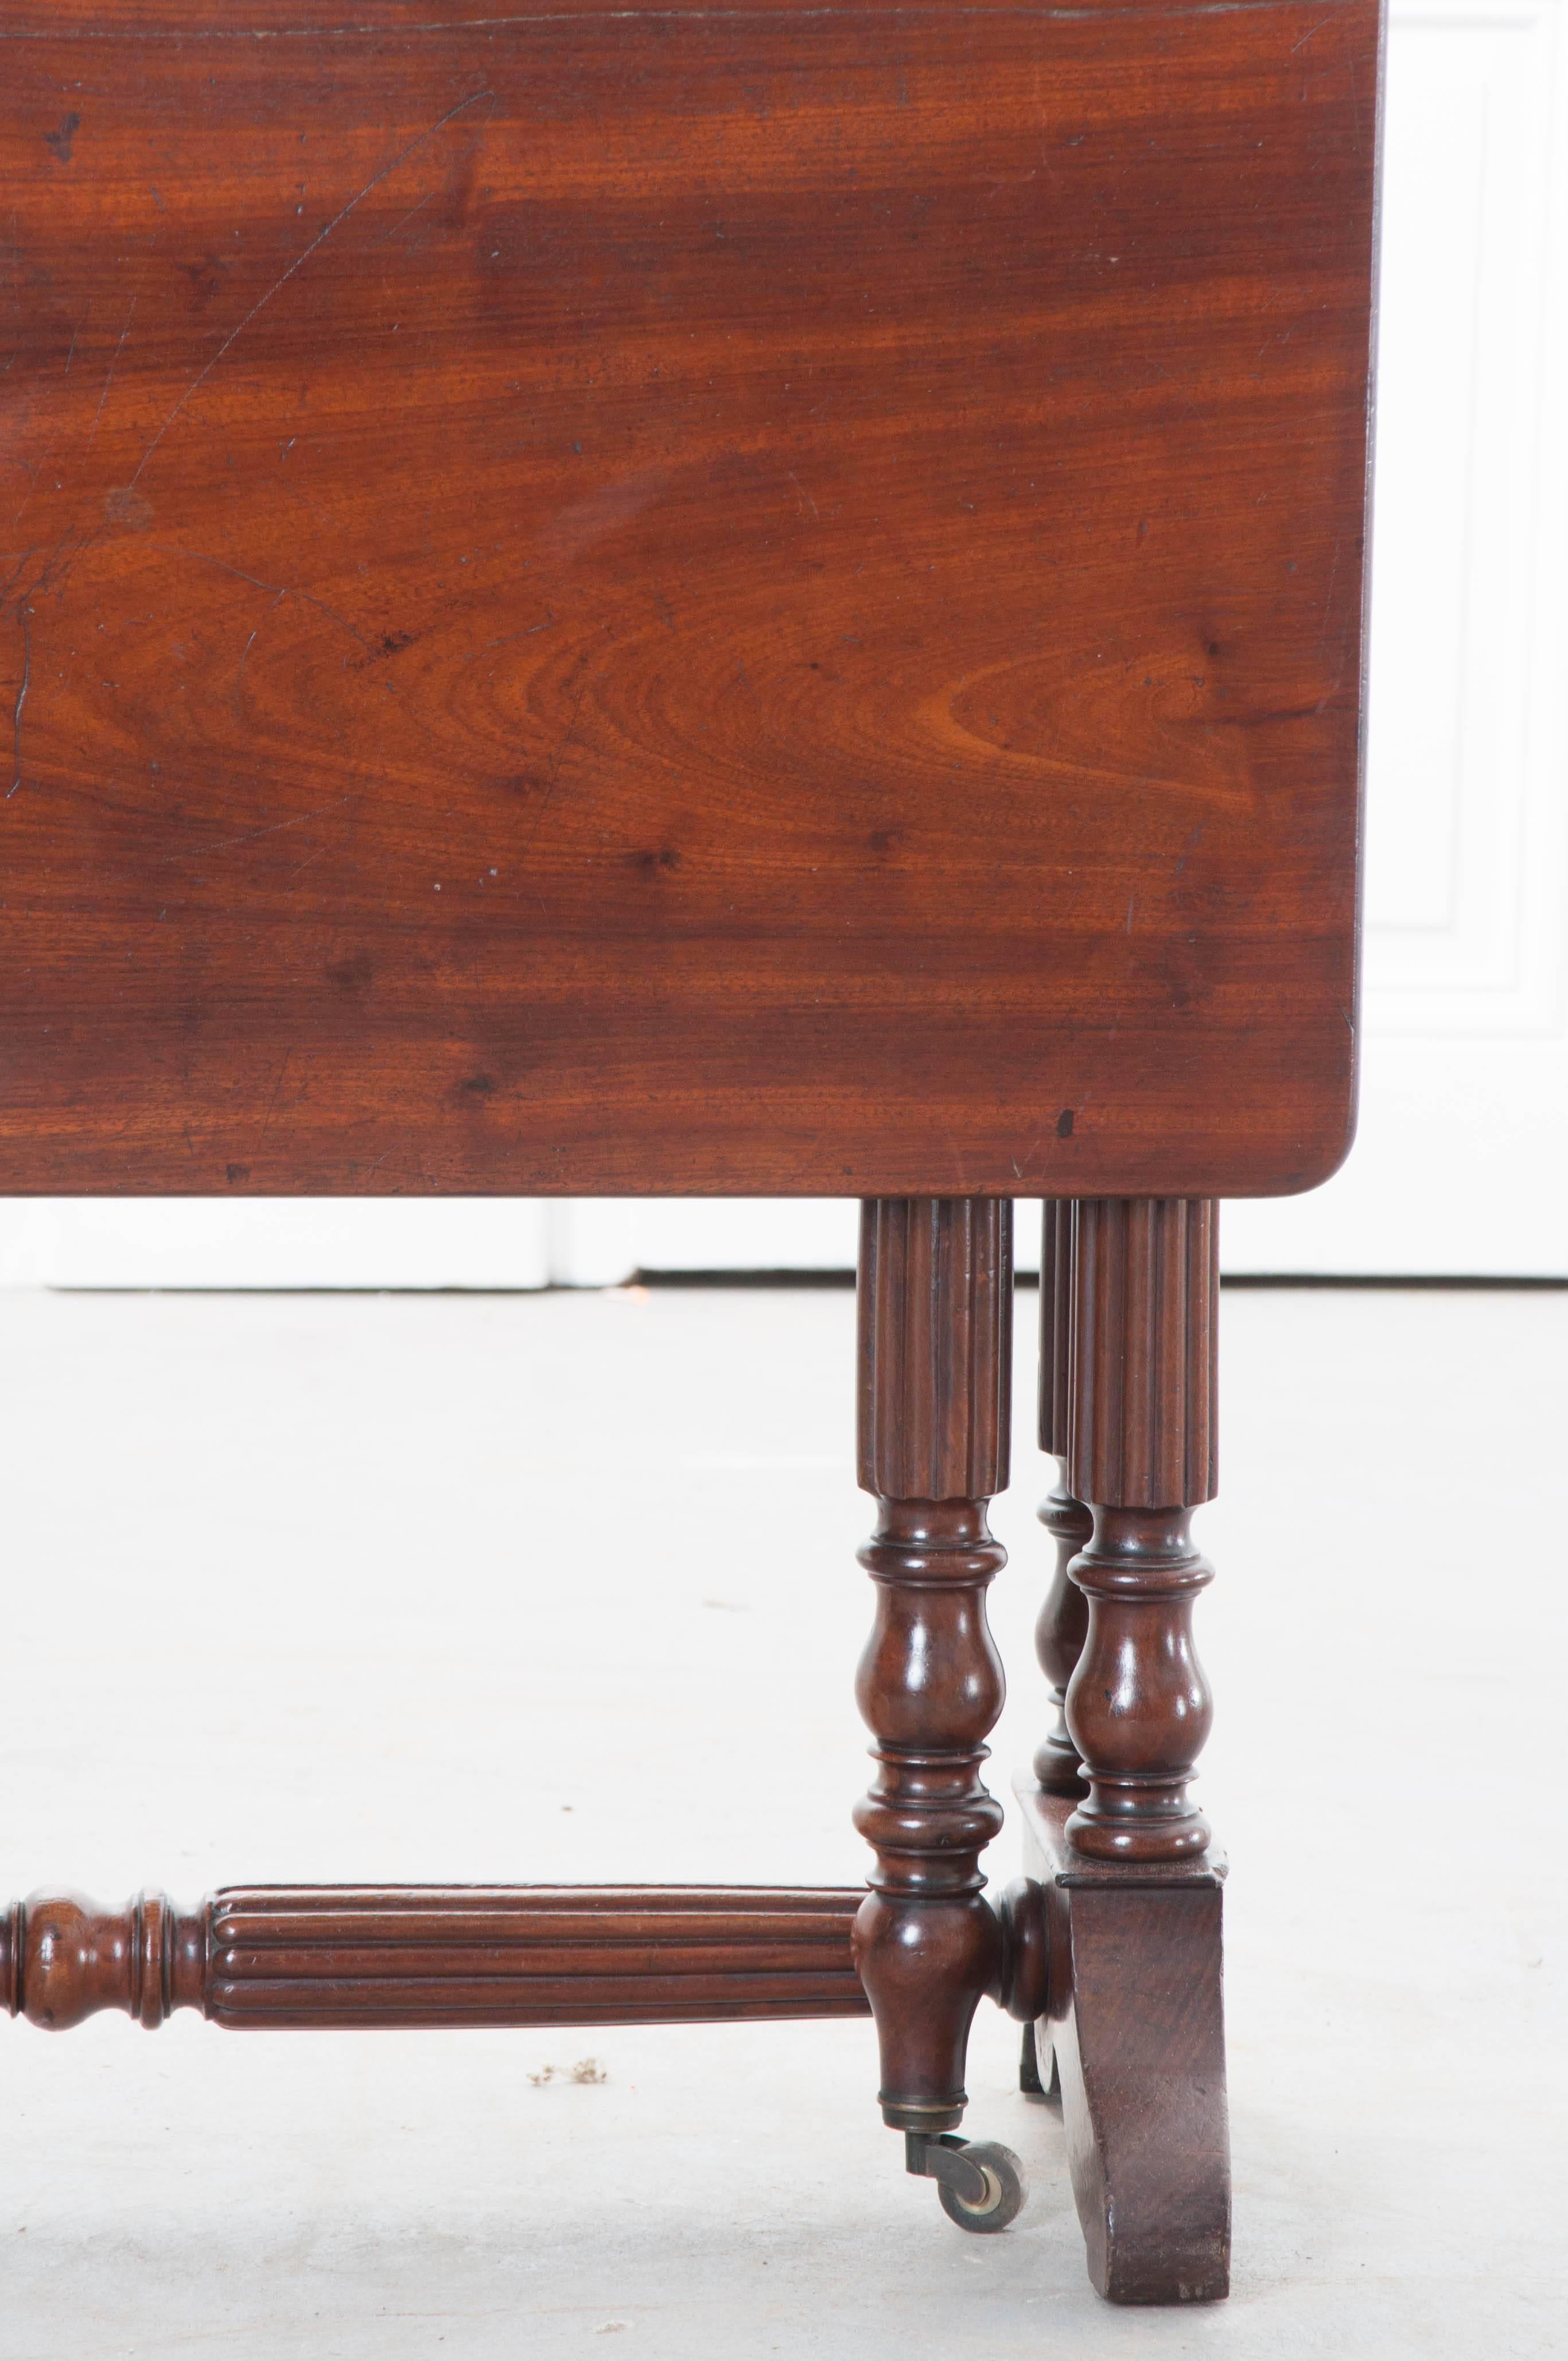 English 19th Century Regency Mahogany Drop-Leaf Table In Good Condition For Sale In Baton Rouge, LA